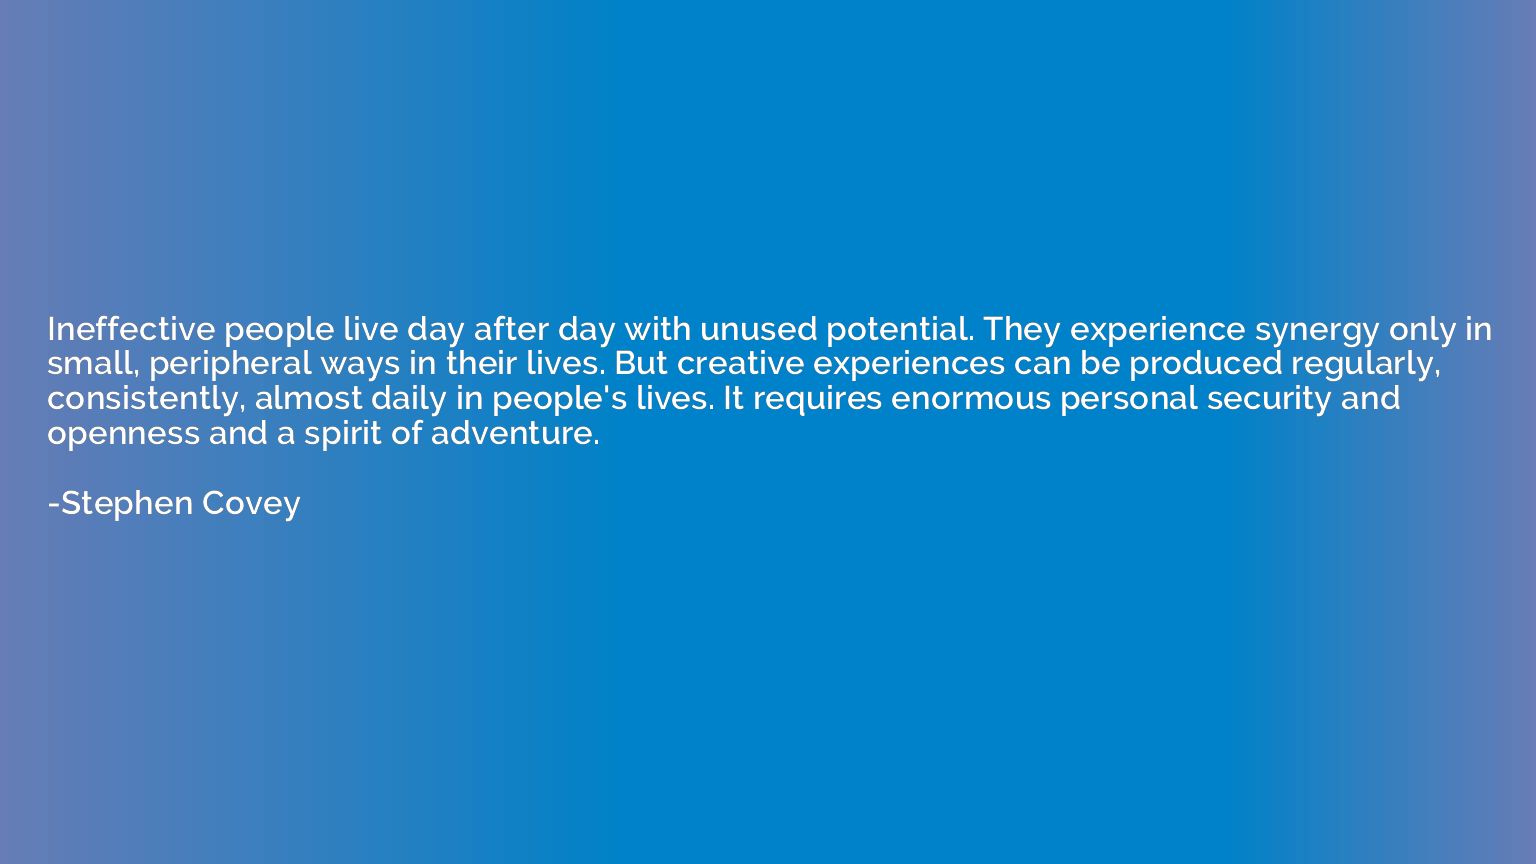 Ineffective people live day after day with unused potential.